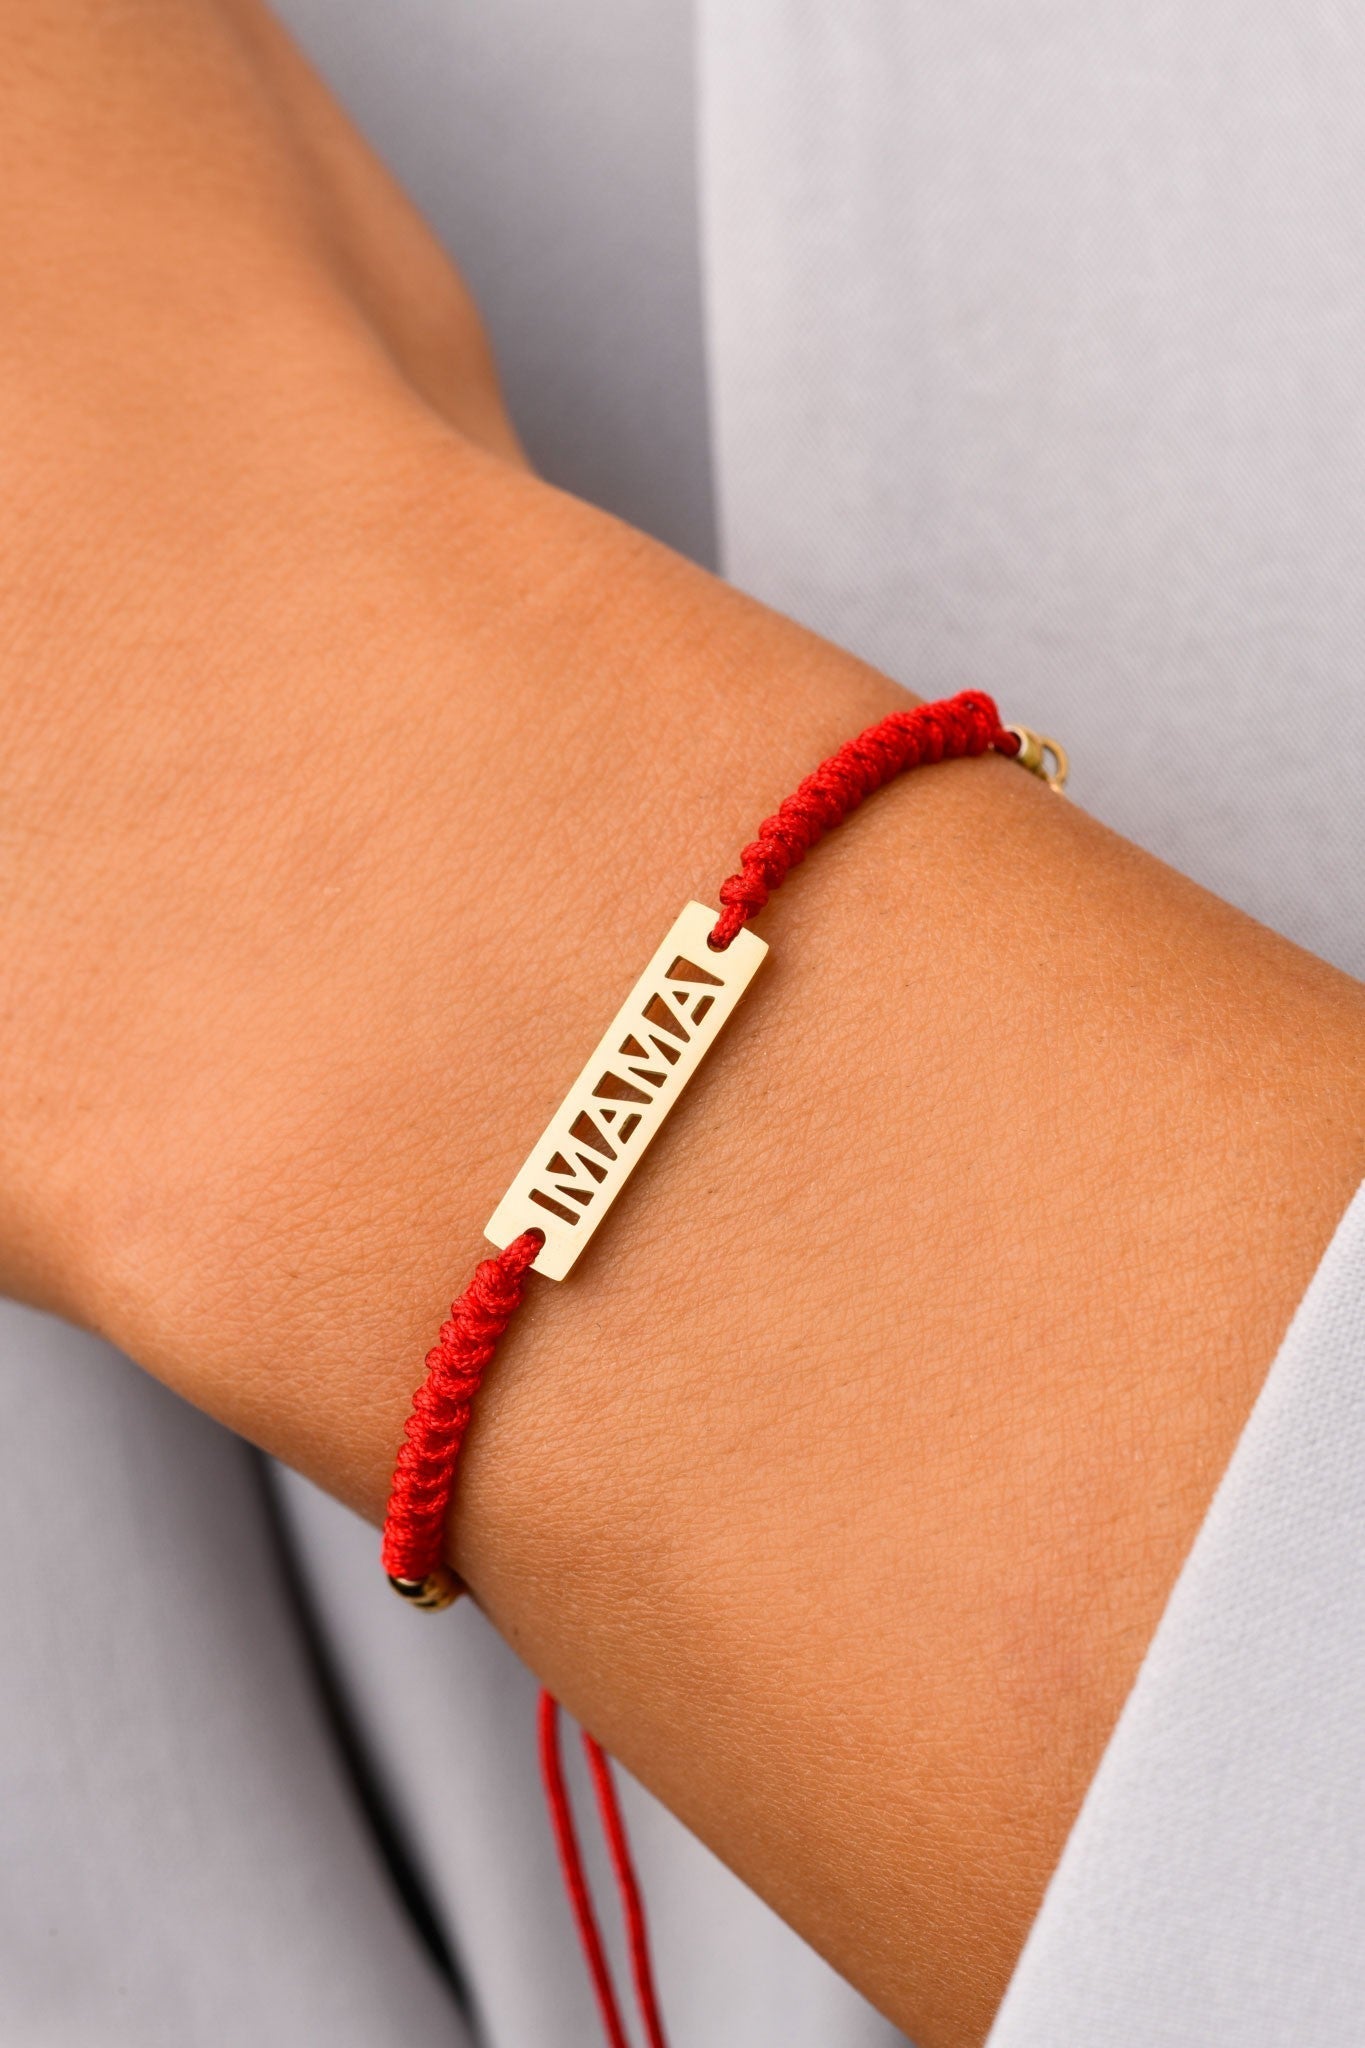 14k Gold Plated MaMa Bracelet on Red Rope